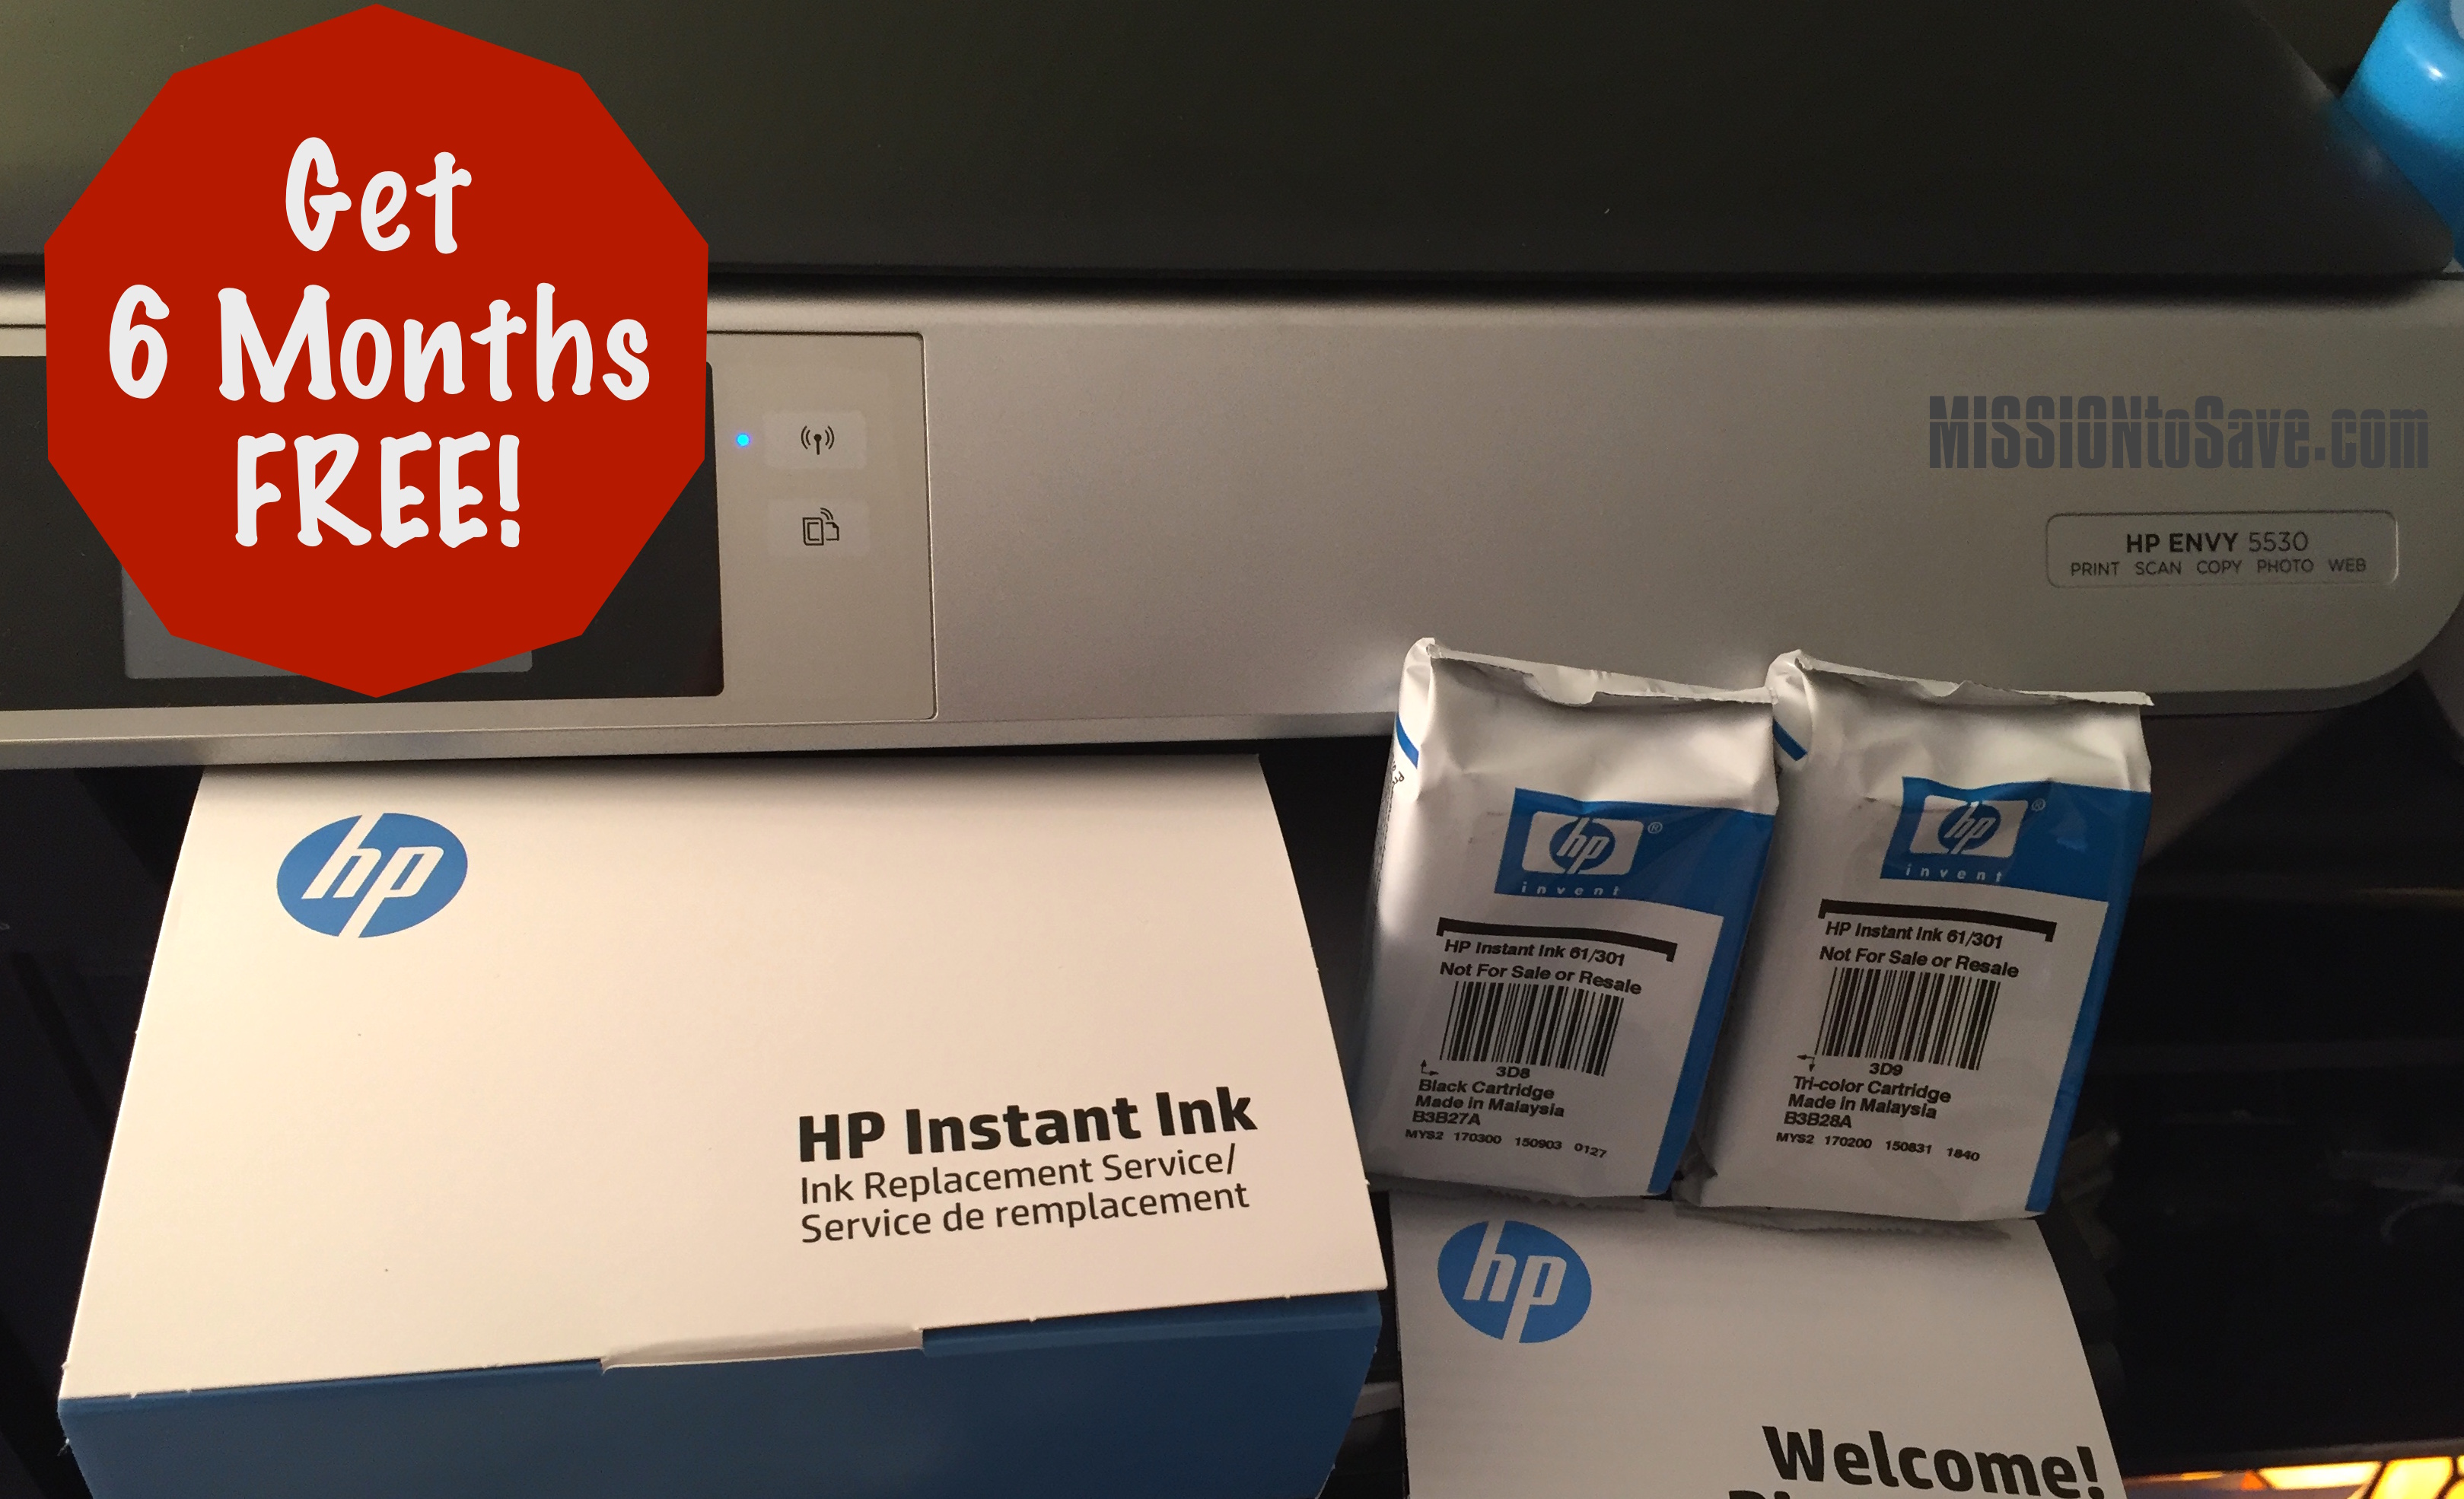 Get 6 Months of HP Instant Ink for FREE! Mission to Save